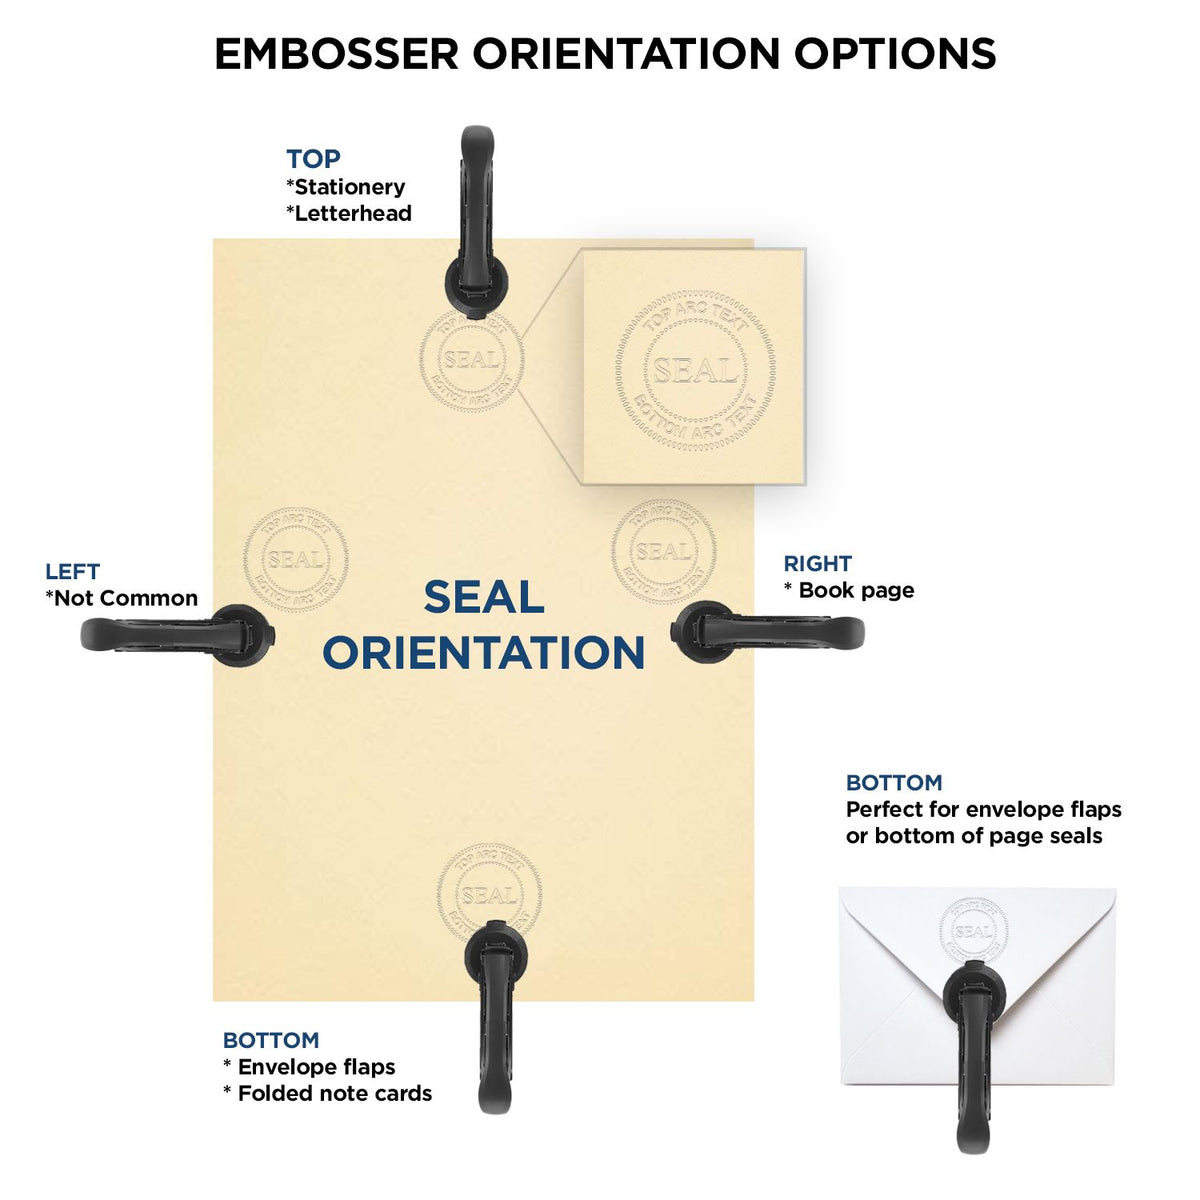 An infographic for the Hawaii Geologist Desk Seal showing embosser orientation, this is showing examples of a top, bottom, right and left insert.